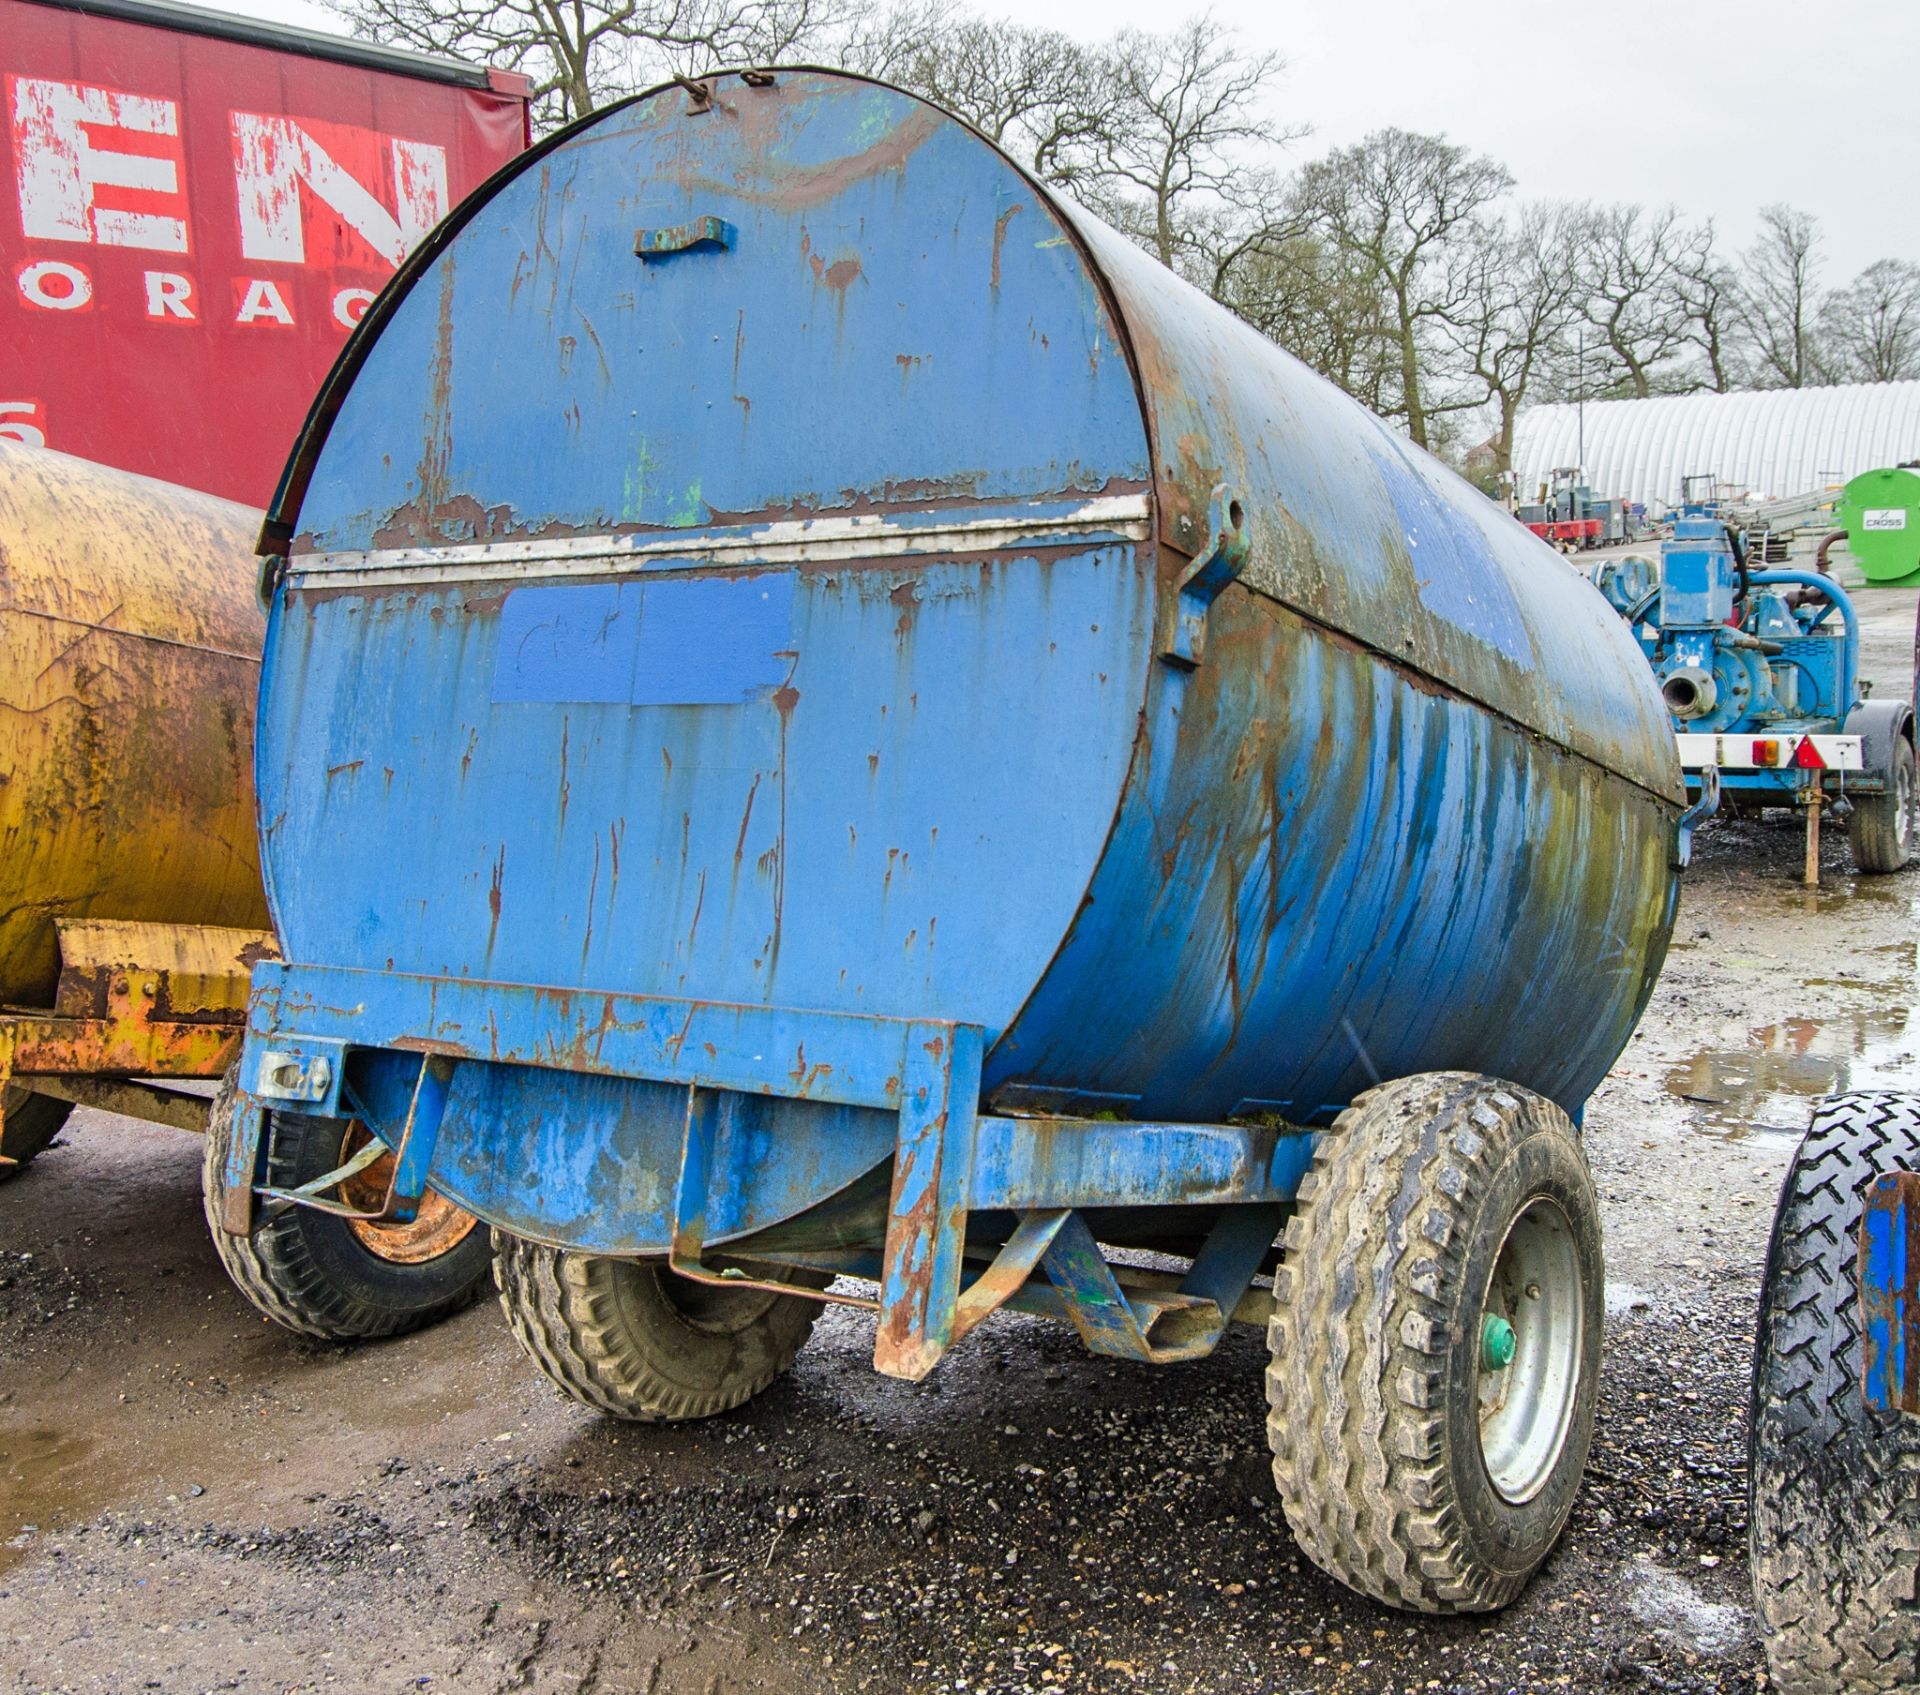 Trailer Engineering 2140 litre site tow bunded fuel bowser c/w manual pump, delivery hose & - Image 3 of 7